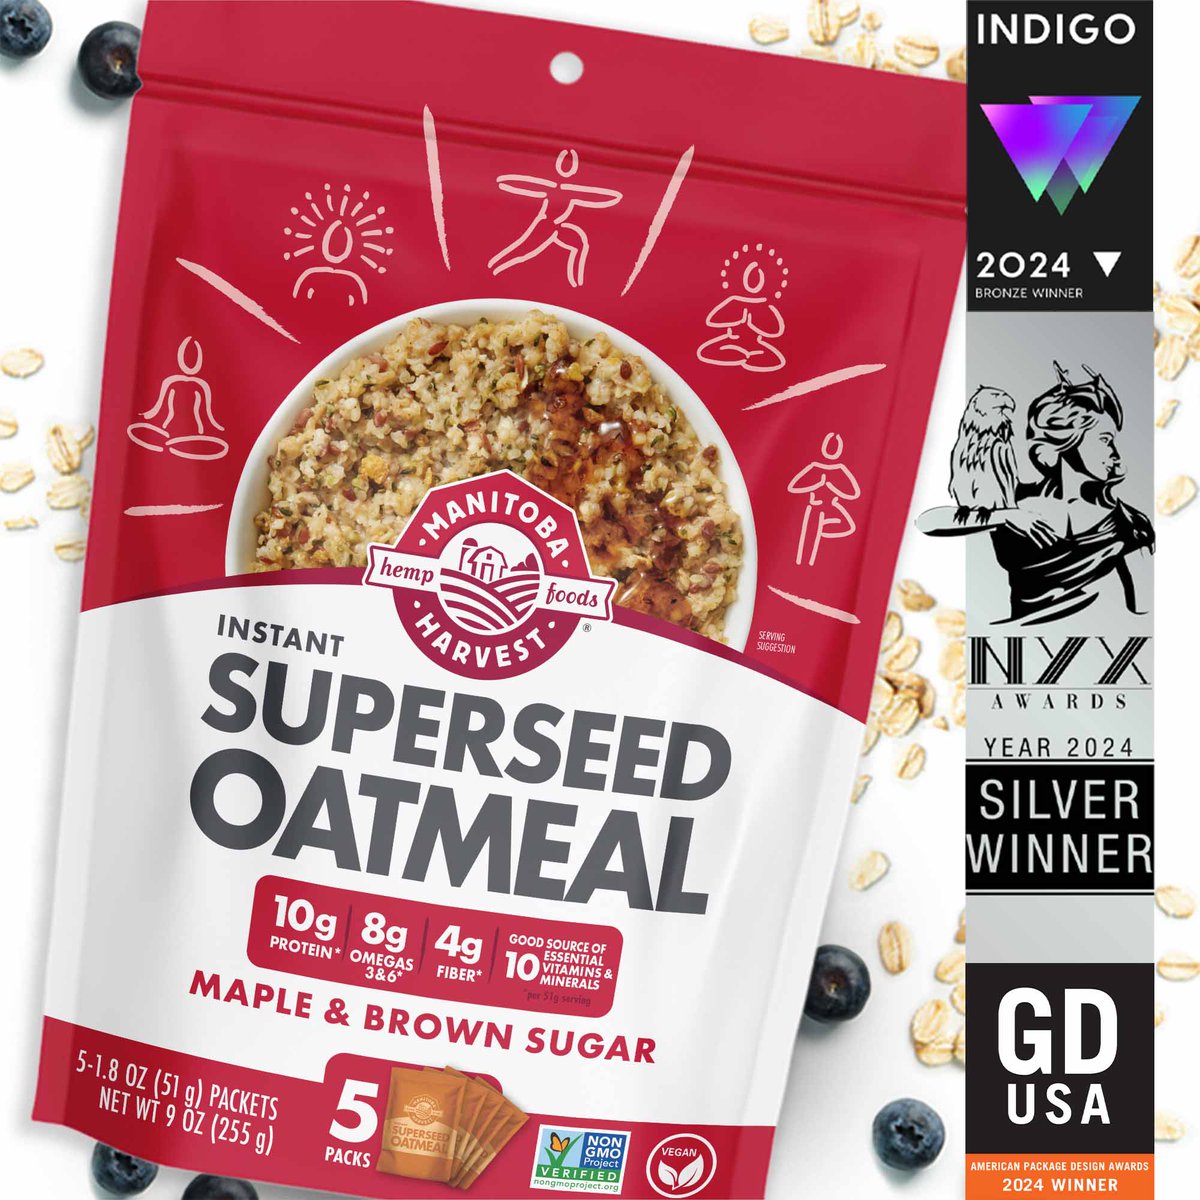 Our work for Manitoba Harvest's Superseed Oatmeal line has been honored with 3 awards: GDUSA American Package Design Awards, Silver NYX Awards, and Bronze Indigo Design Award.
#nyxawards #indigodesign #gdusa #manitobaharvest #biondogroup #oatmeal #hempfood #packagedesign #design